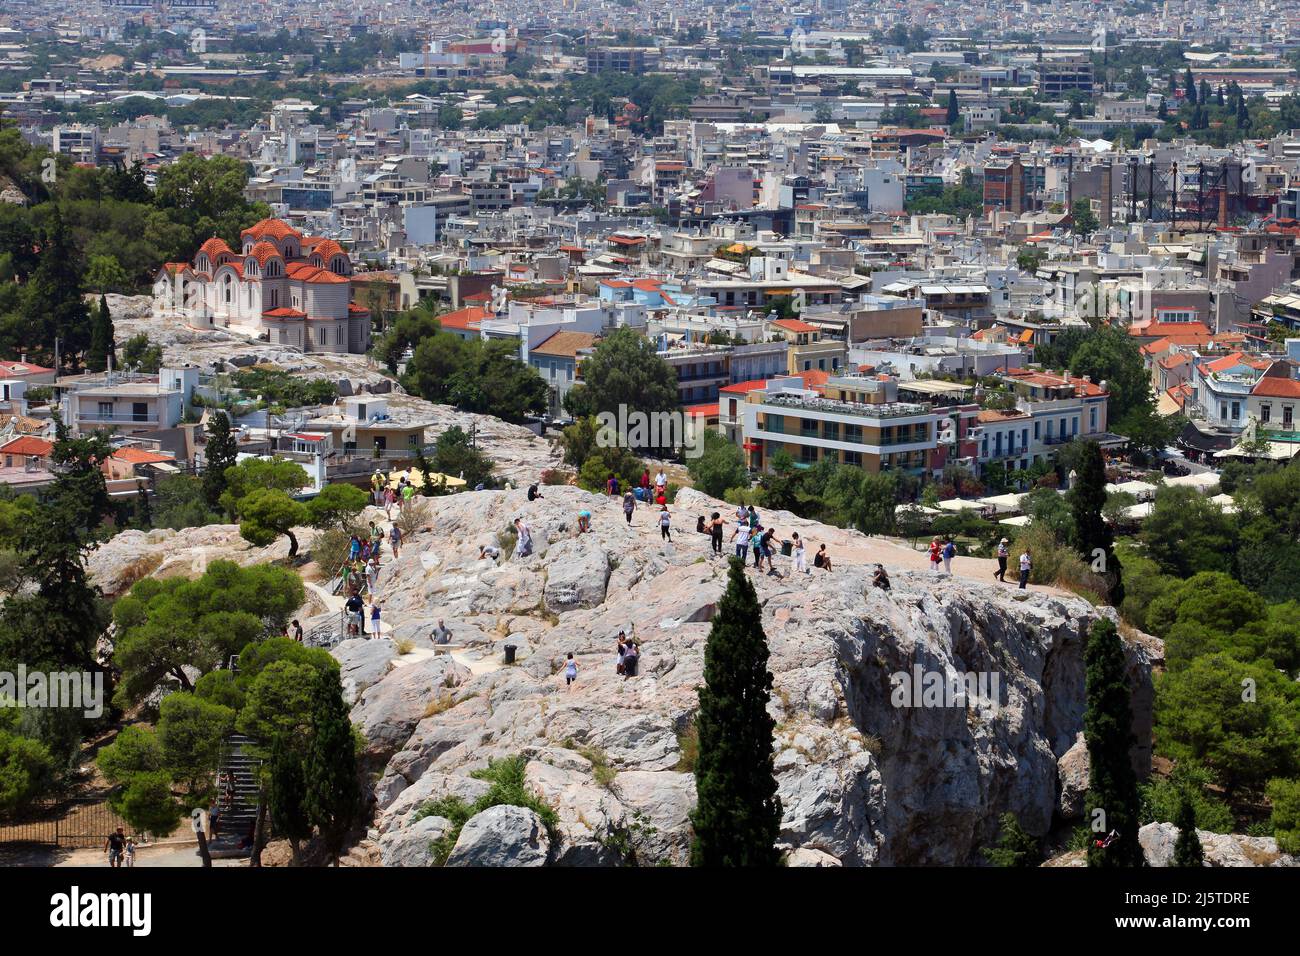 ATHENS, GREECE - JUNE 29: Areopagus (Mars Hill) behind Athens City from Acropolis on June 29, 2012 in Athens, Greece. Mars Hill is a prominent site located 140 feet below the Acropolis. Stock Photo